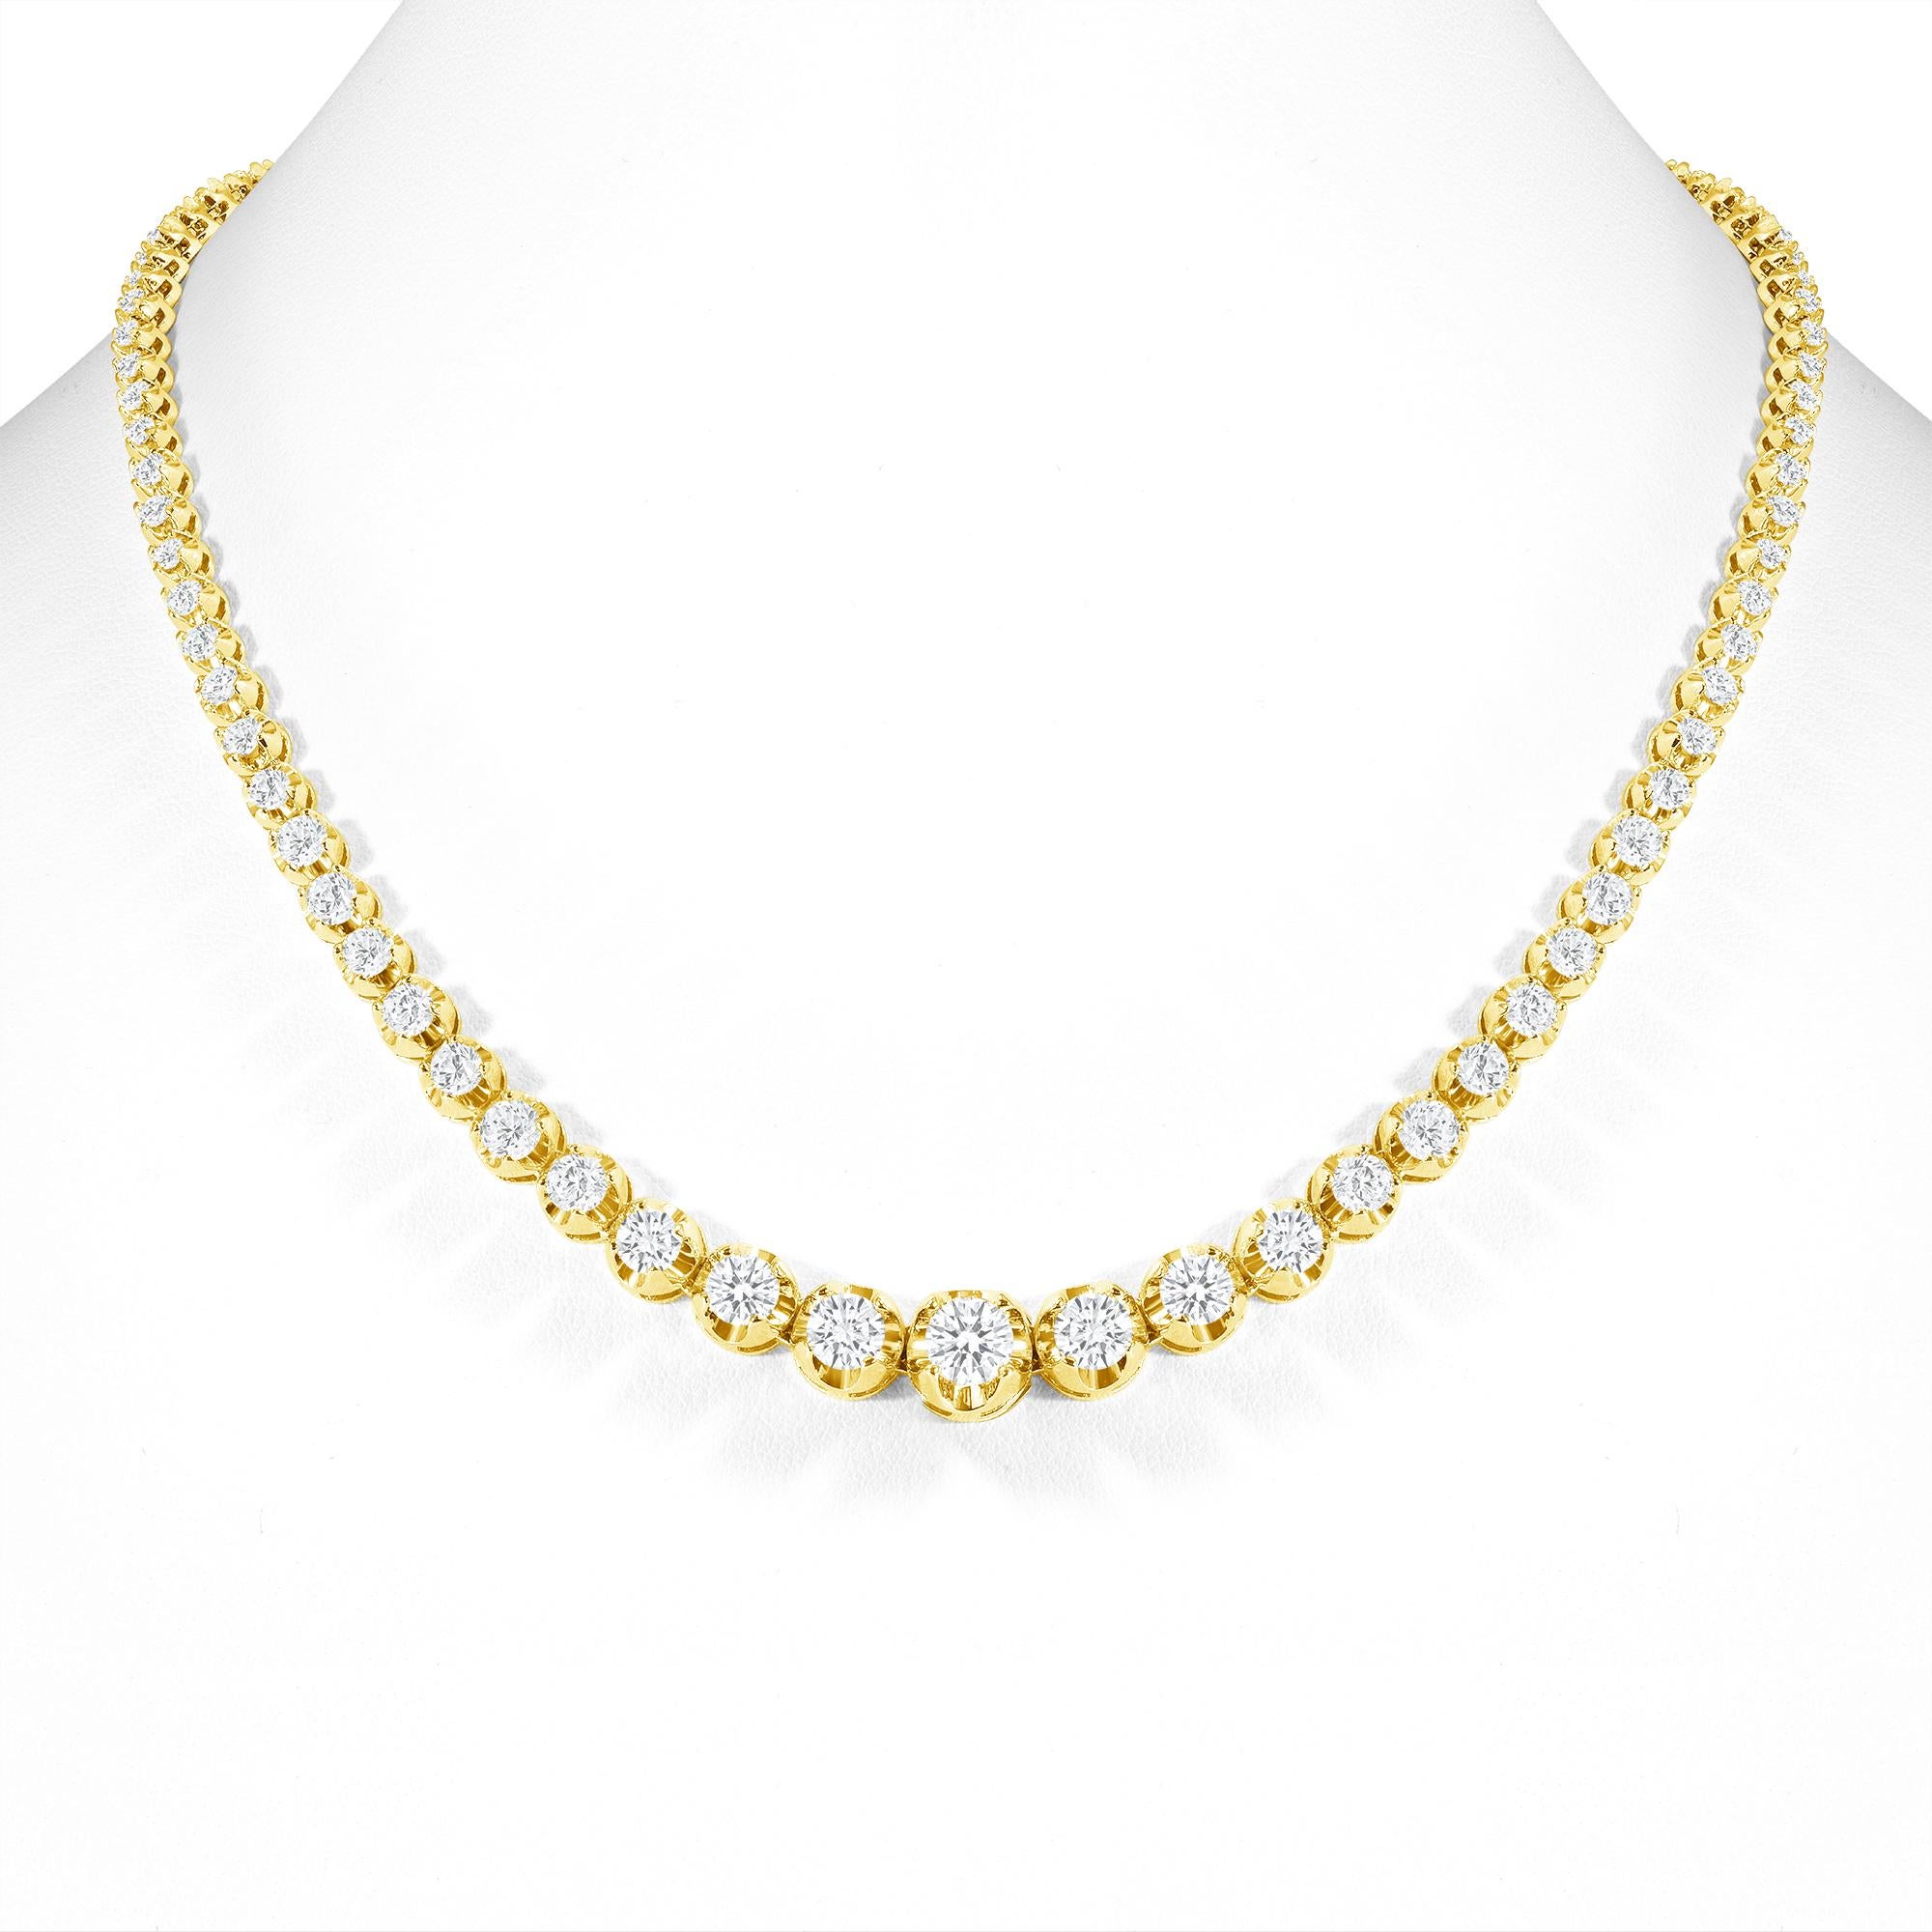 This finely made graduated necklace with beautiful round diamonds sits elegantly on any neck. 

Metal: 14k Gold
Diamond Cut: Round
Total Diamond Approx. Carats:  7ct
Diamond Clarity: VS
Diamond Color: F-G
Size: 18 inches
Color: Yellow Gold
Included